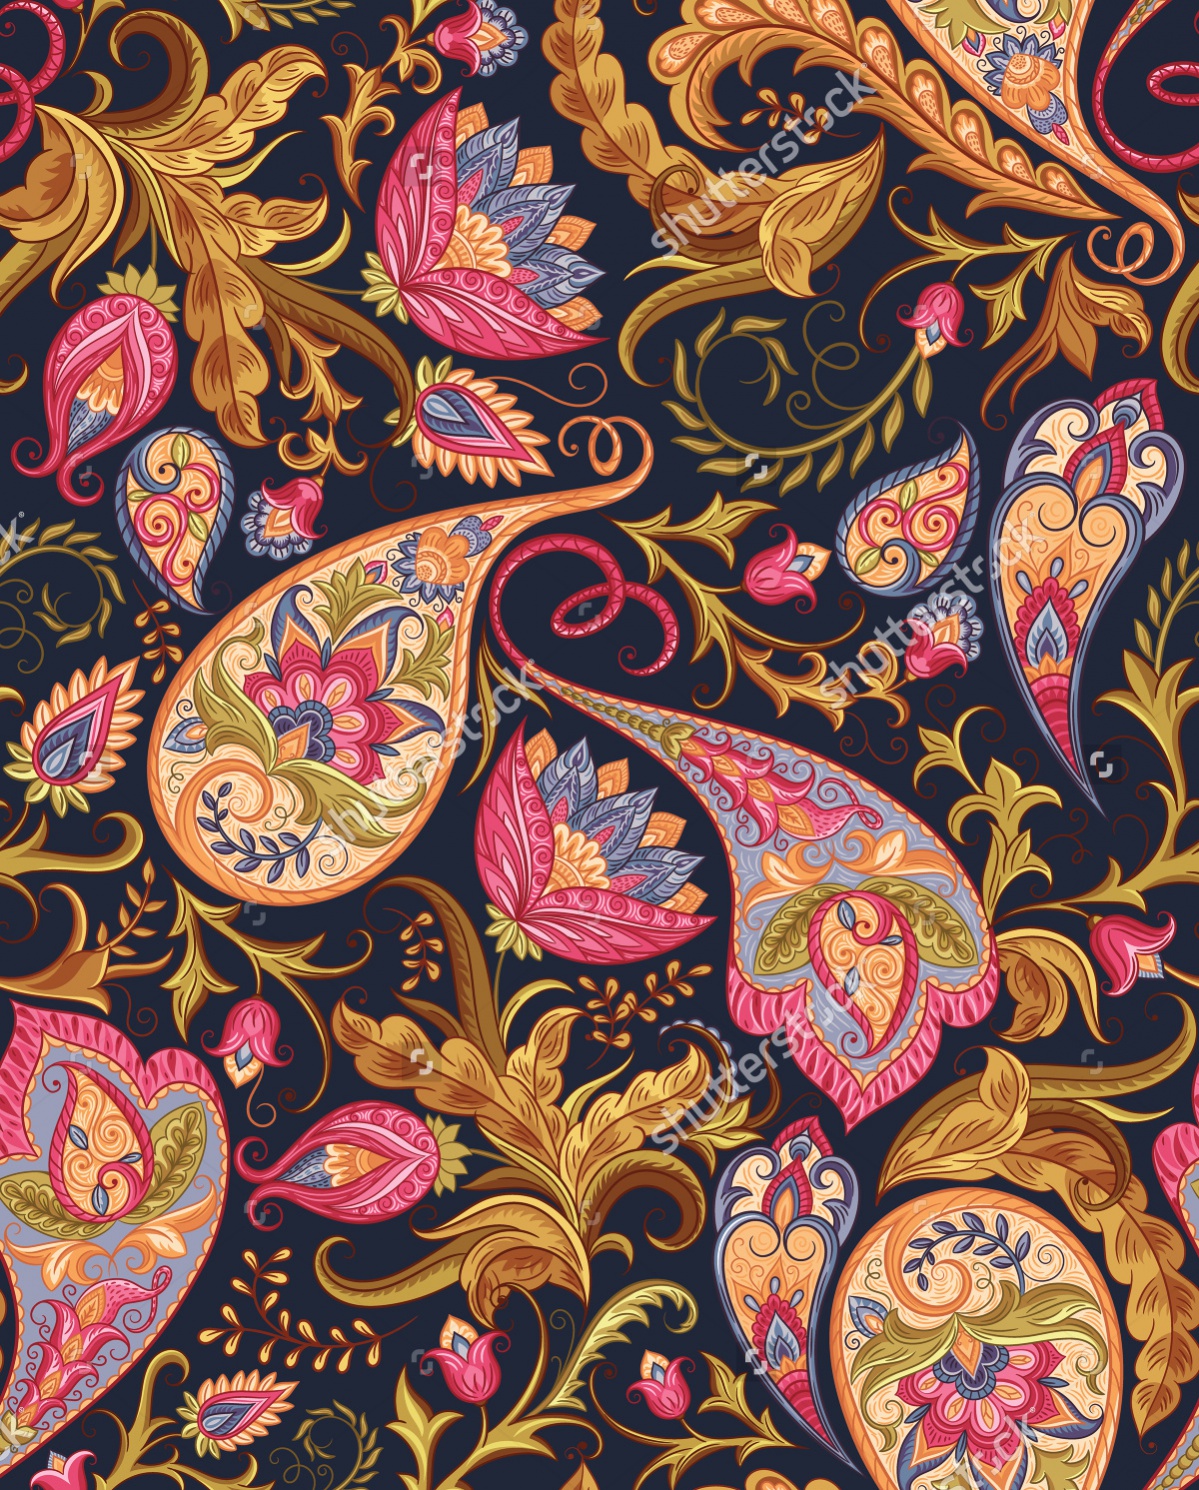 FREE 39+ Paisley Pattern Designs in PSD Vector EPS AI